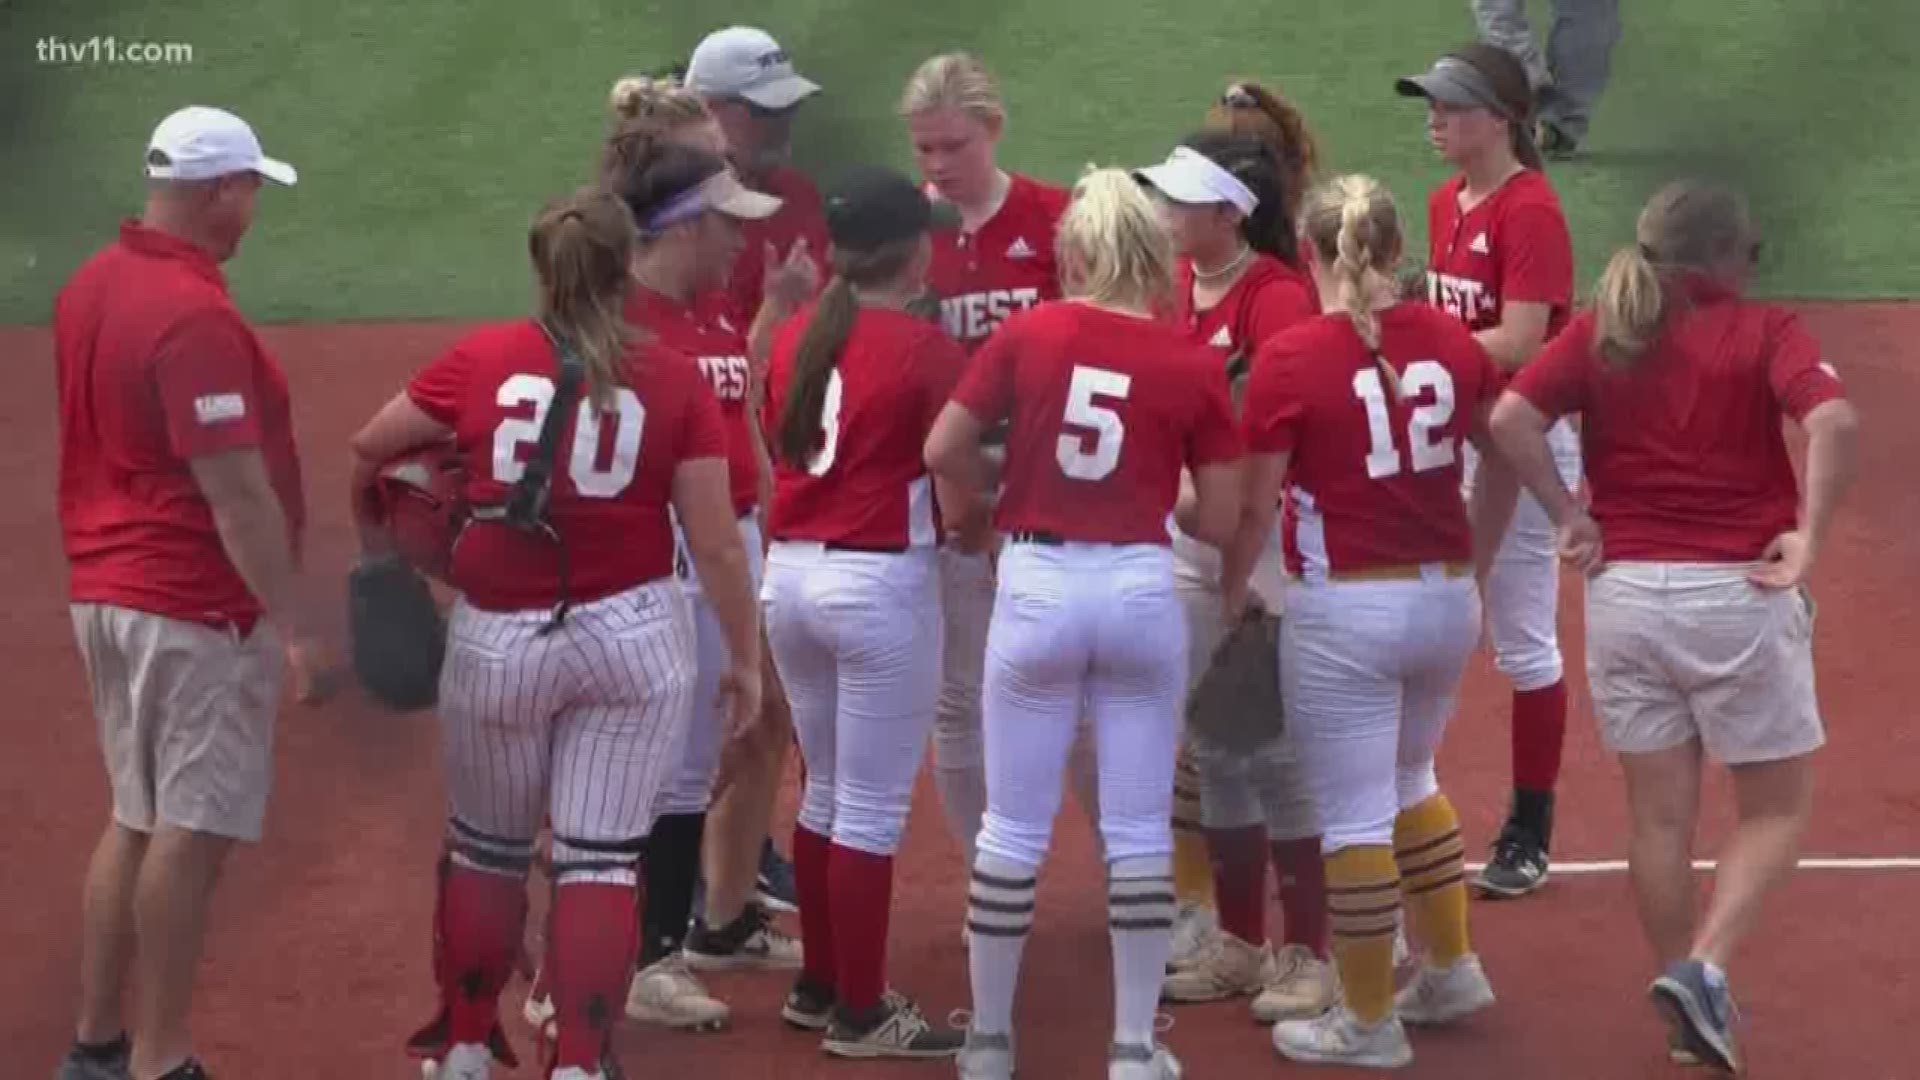 West blanks East, 7-0, in All-Star softball game